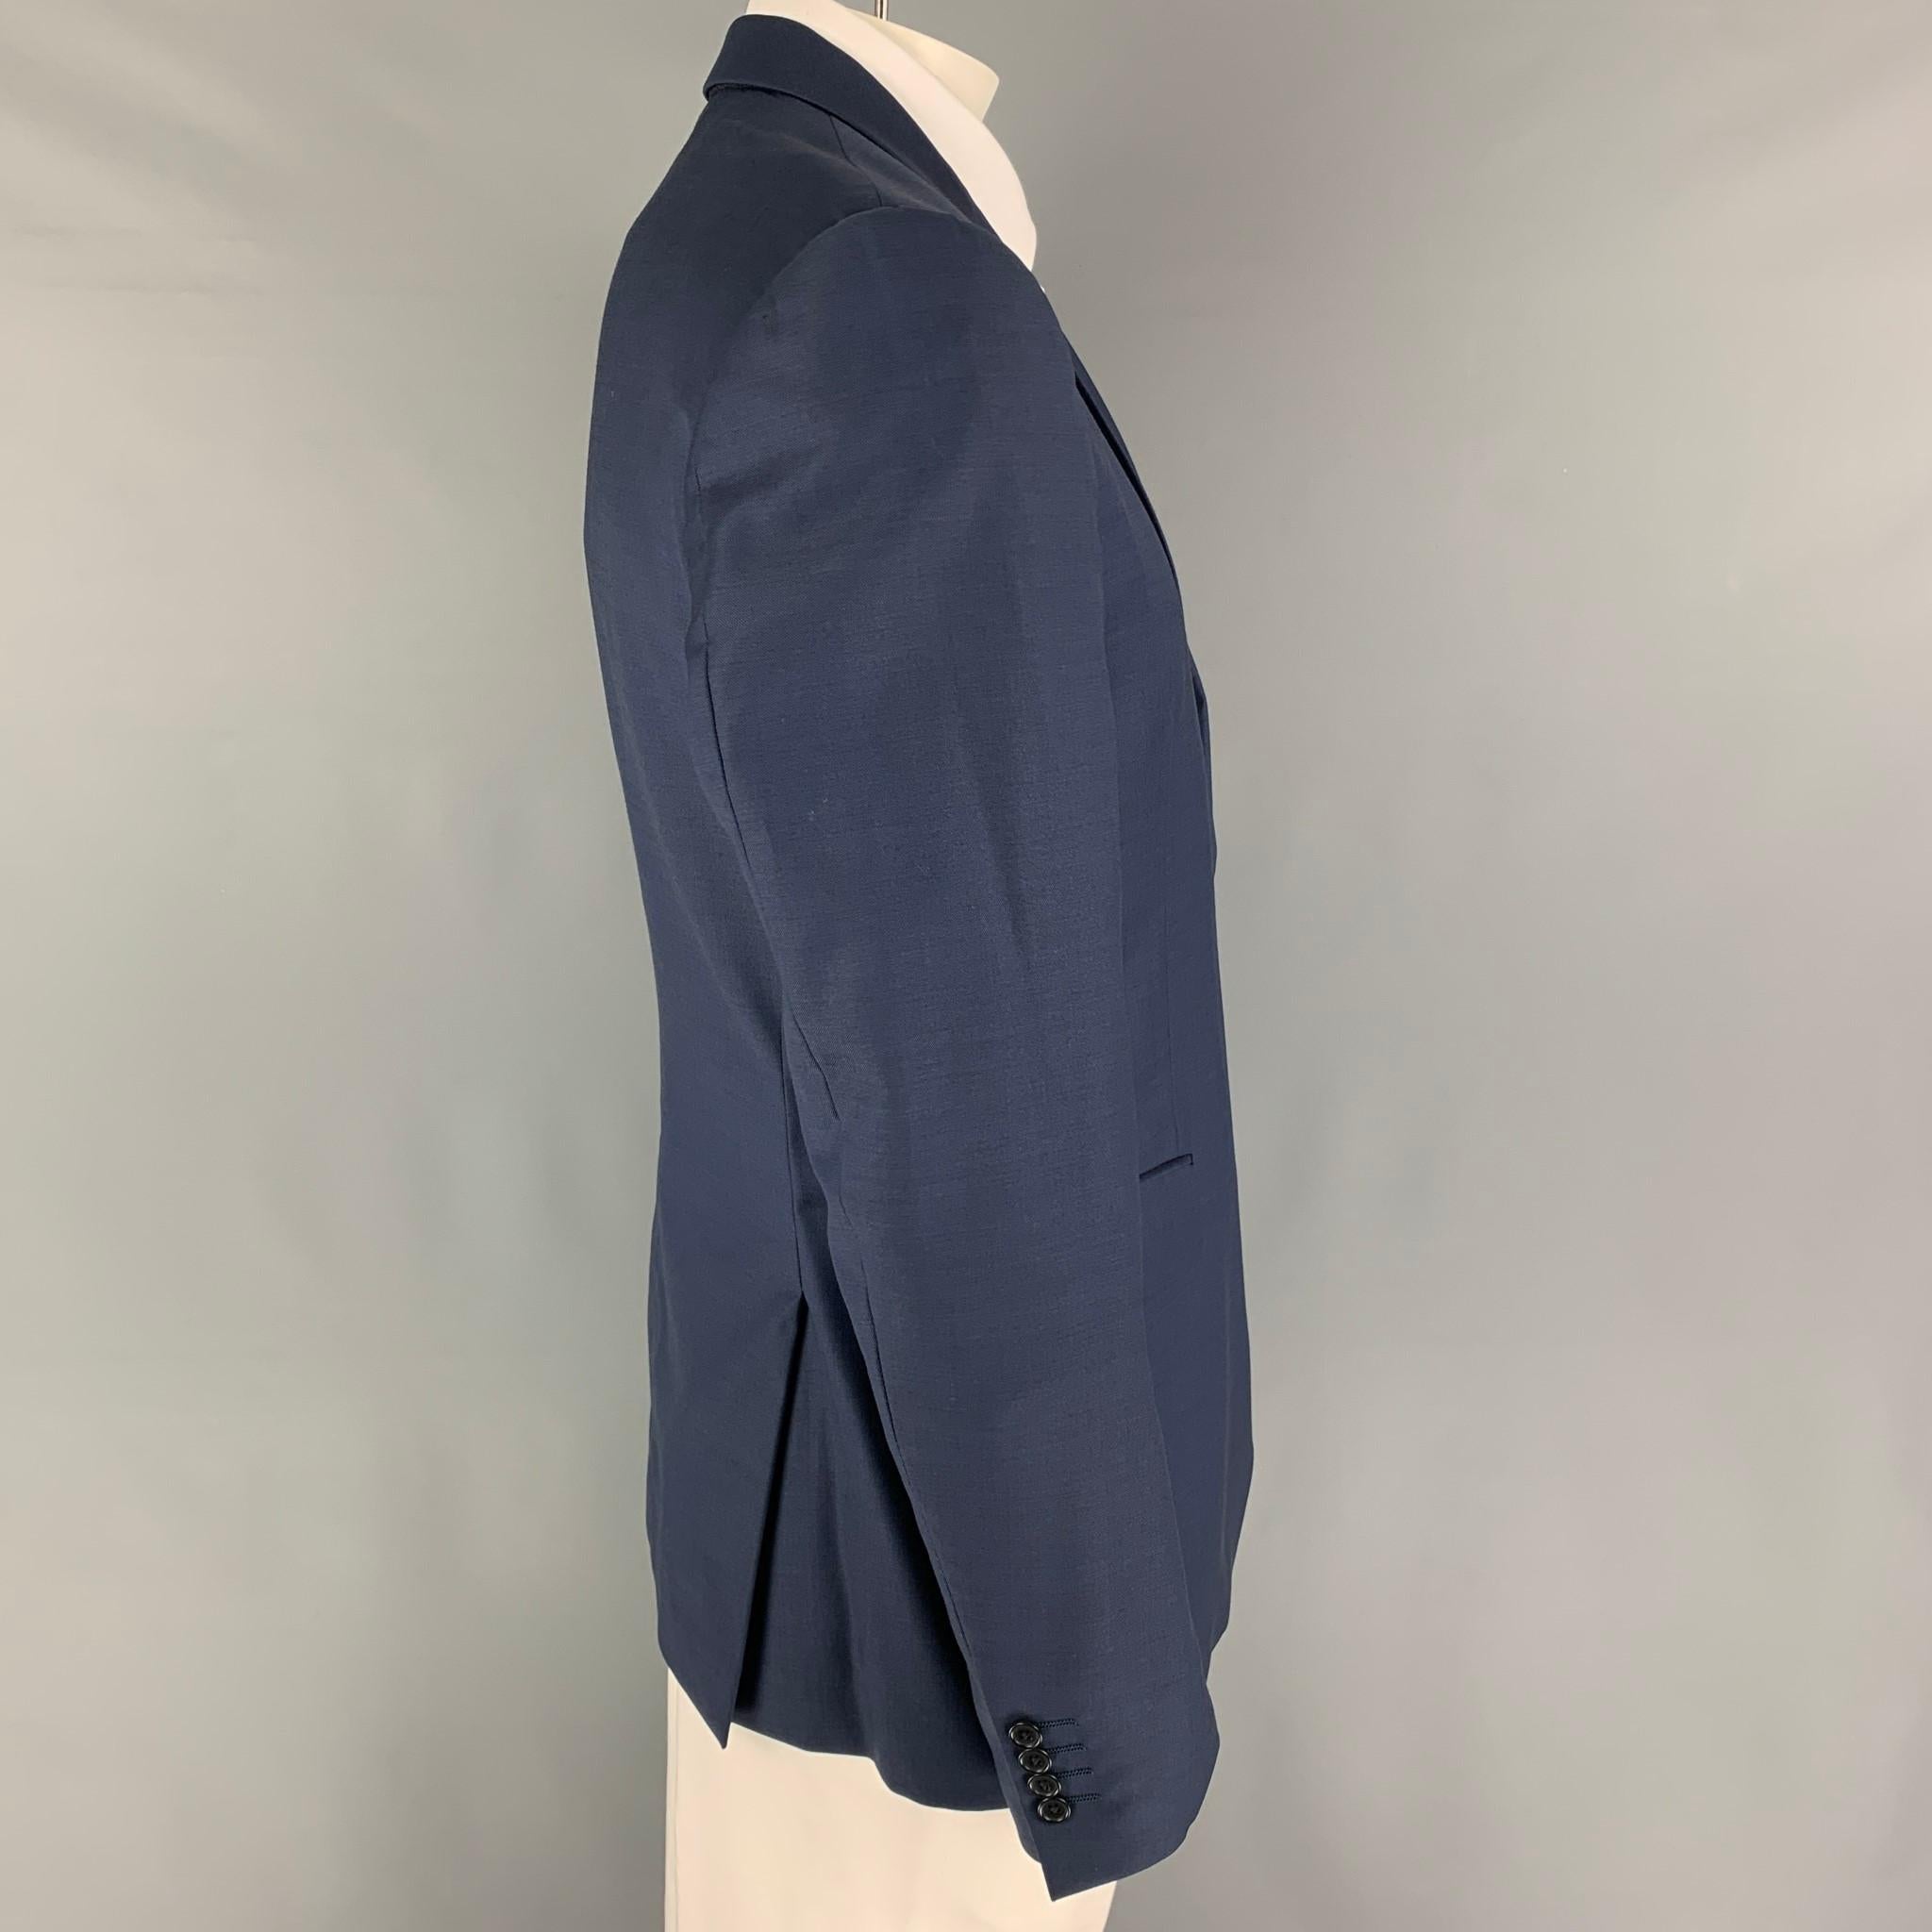 JOHN VARVATOS sport coat comes in a blue wool with a full liner featuring a notch lapel, flap pockets, double back vent, and a double button closure. Made in Italy. 

Excellent Pre-Owned Condition. Light wear at underarm. As-is.
Marked: 54